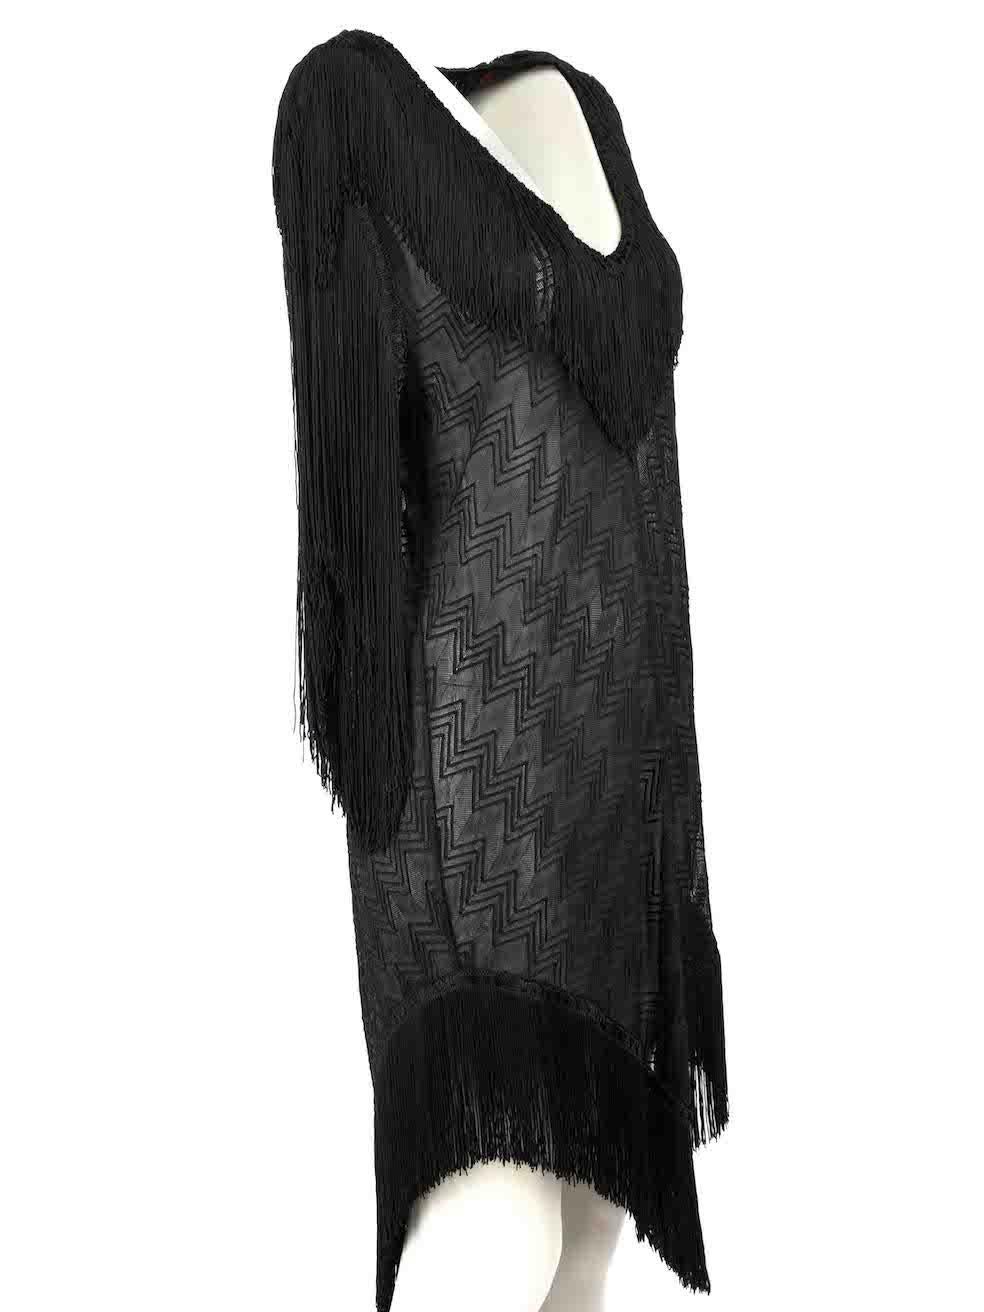 CONDITION is Very good. Hardly any visible wear to dress is evident on this used Missoni Mare designer resale item.
  
Details
Black
Synthetic
Beach cover up
Zig zag pattern
Fringed accent 
V neckline
Sheer
  
Made in Italy
 
Composition
NO